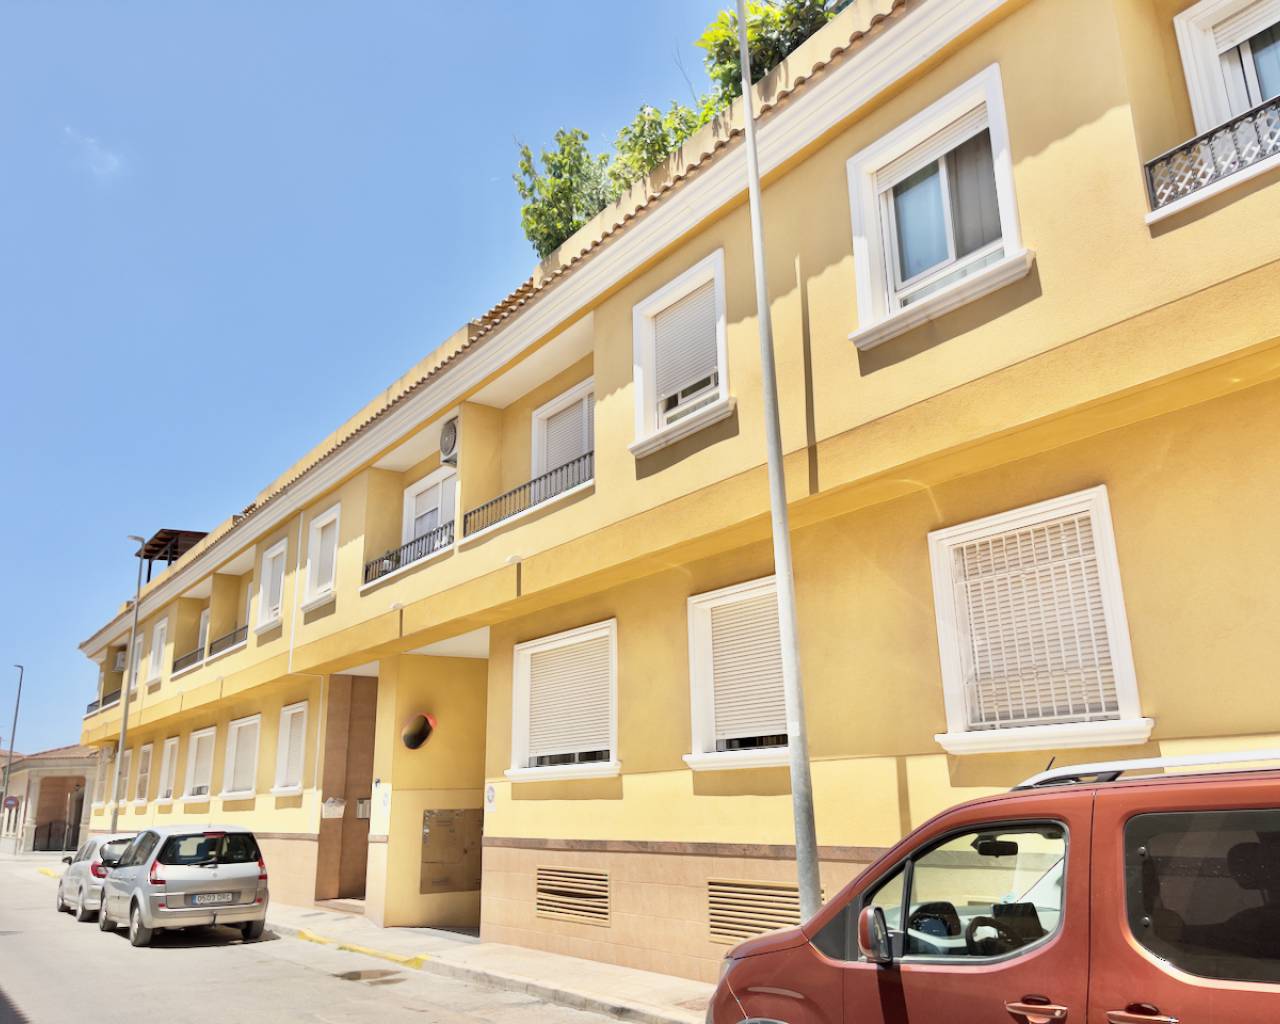 2 bedroom apartment / flat for sale in Catral, Costa Blanca